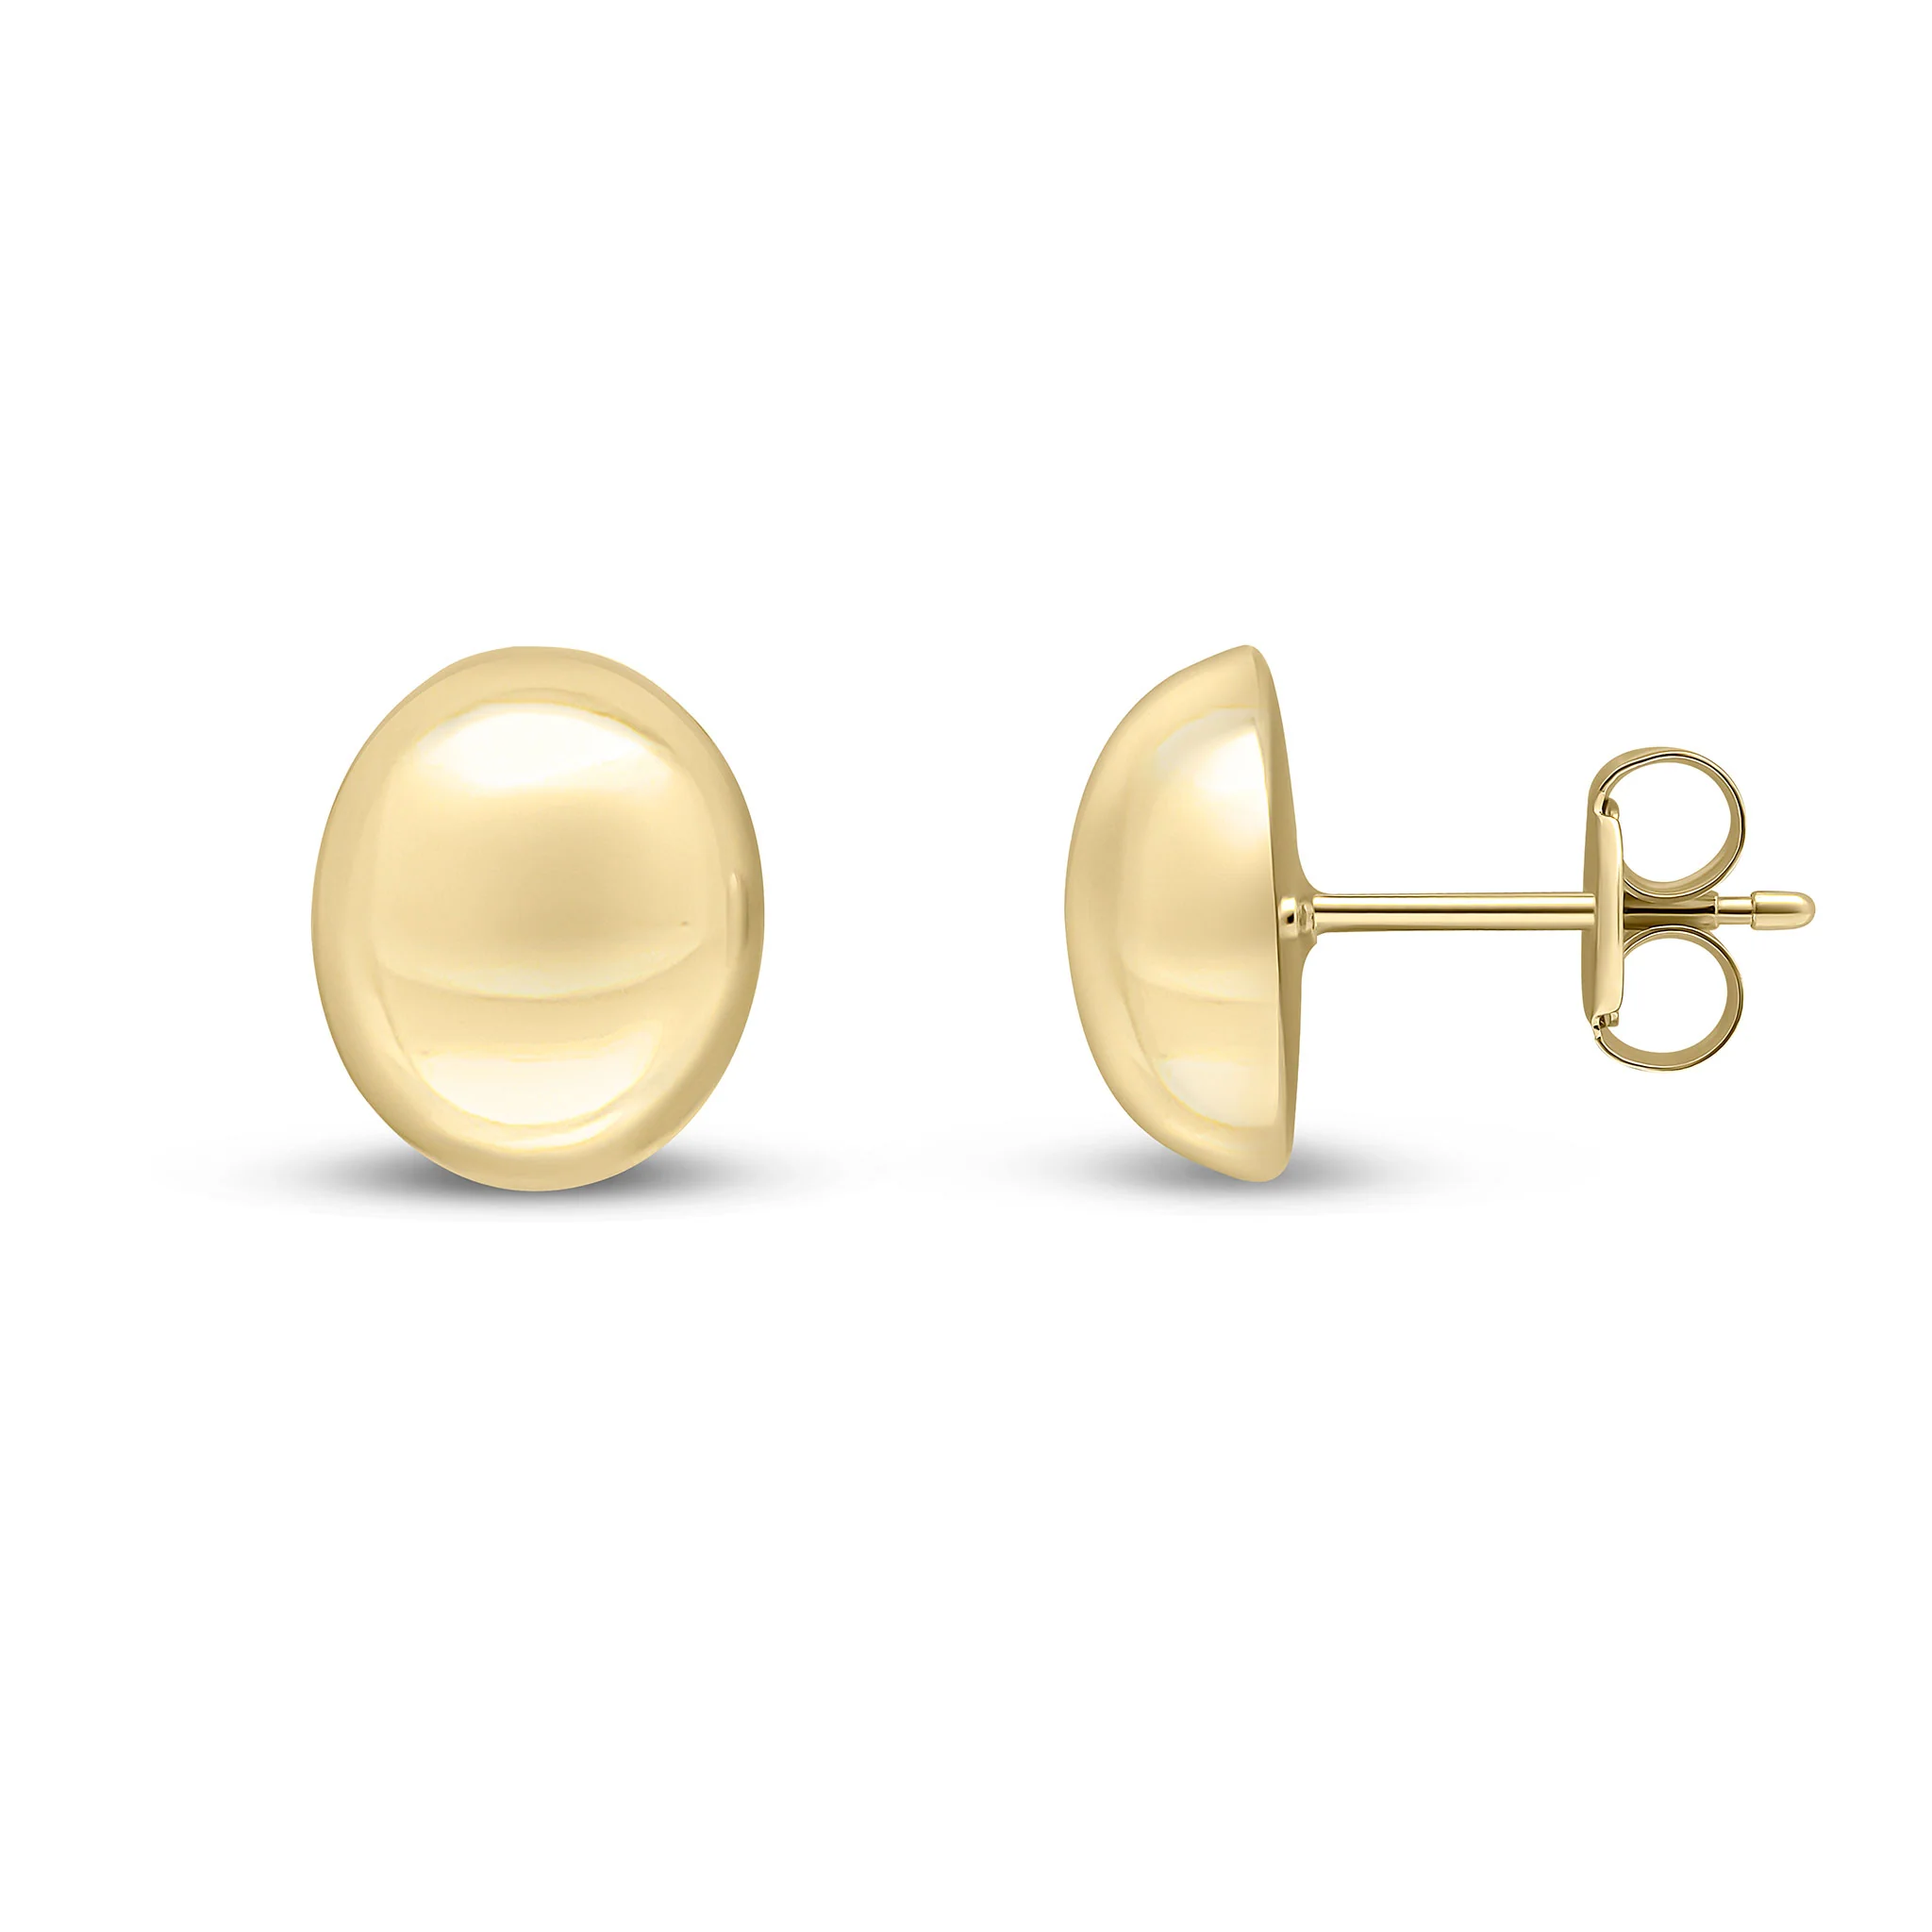 9CT Yellow Gold Oval Dome Polished Stud Earrings (10x8mm) - Robert Anthony Jewellers, Edinburgh